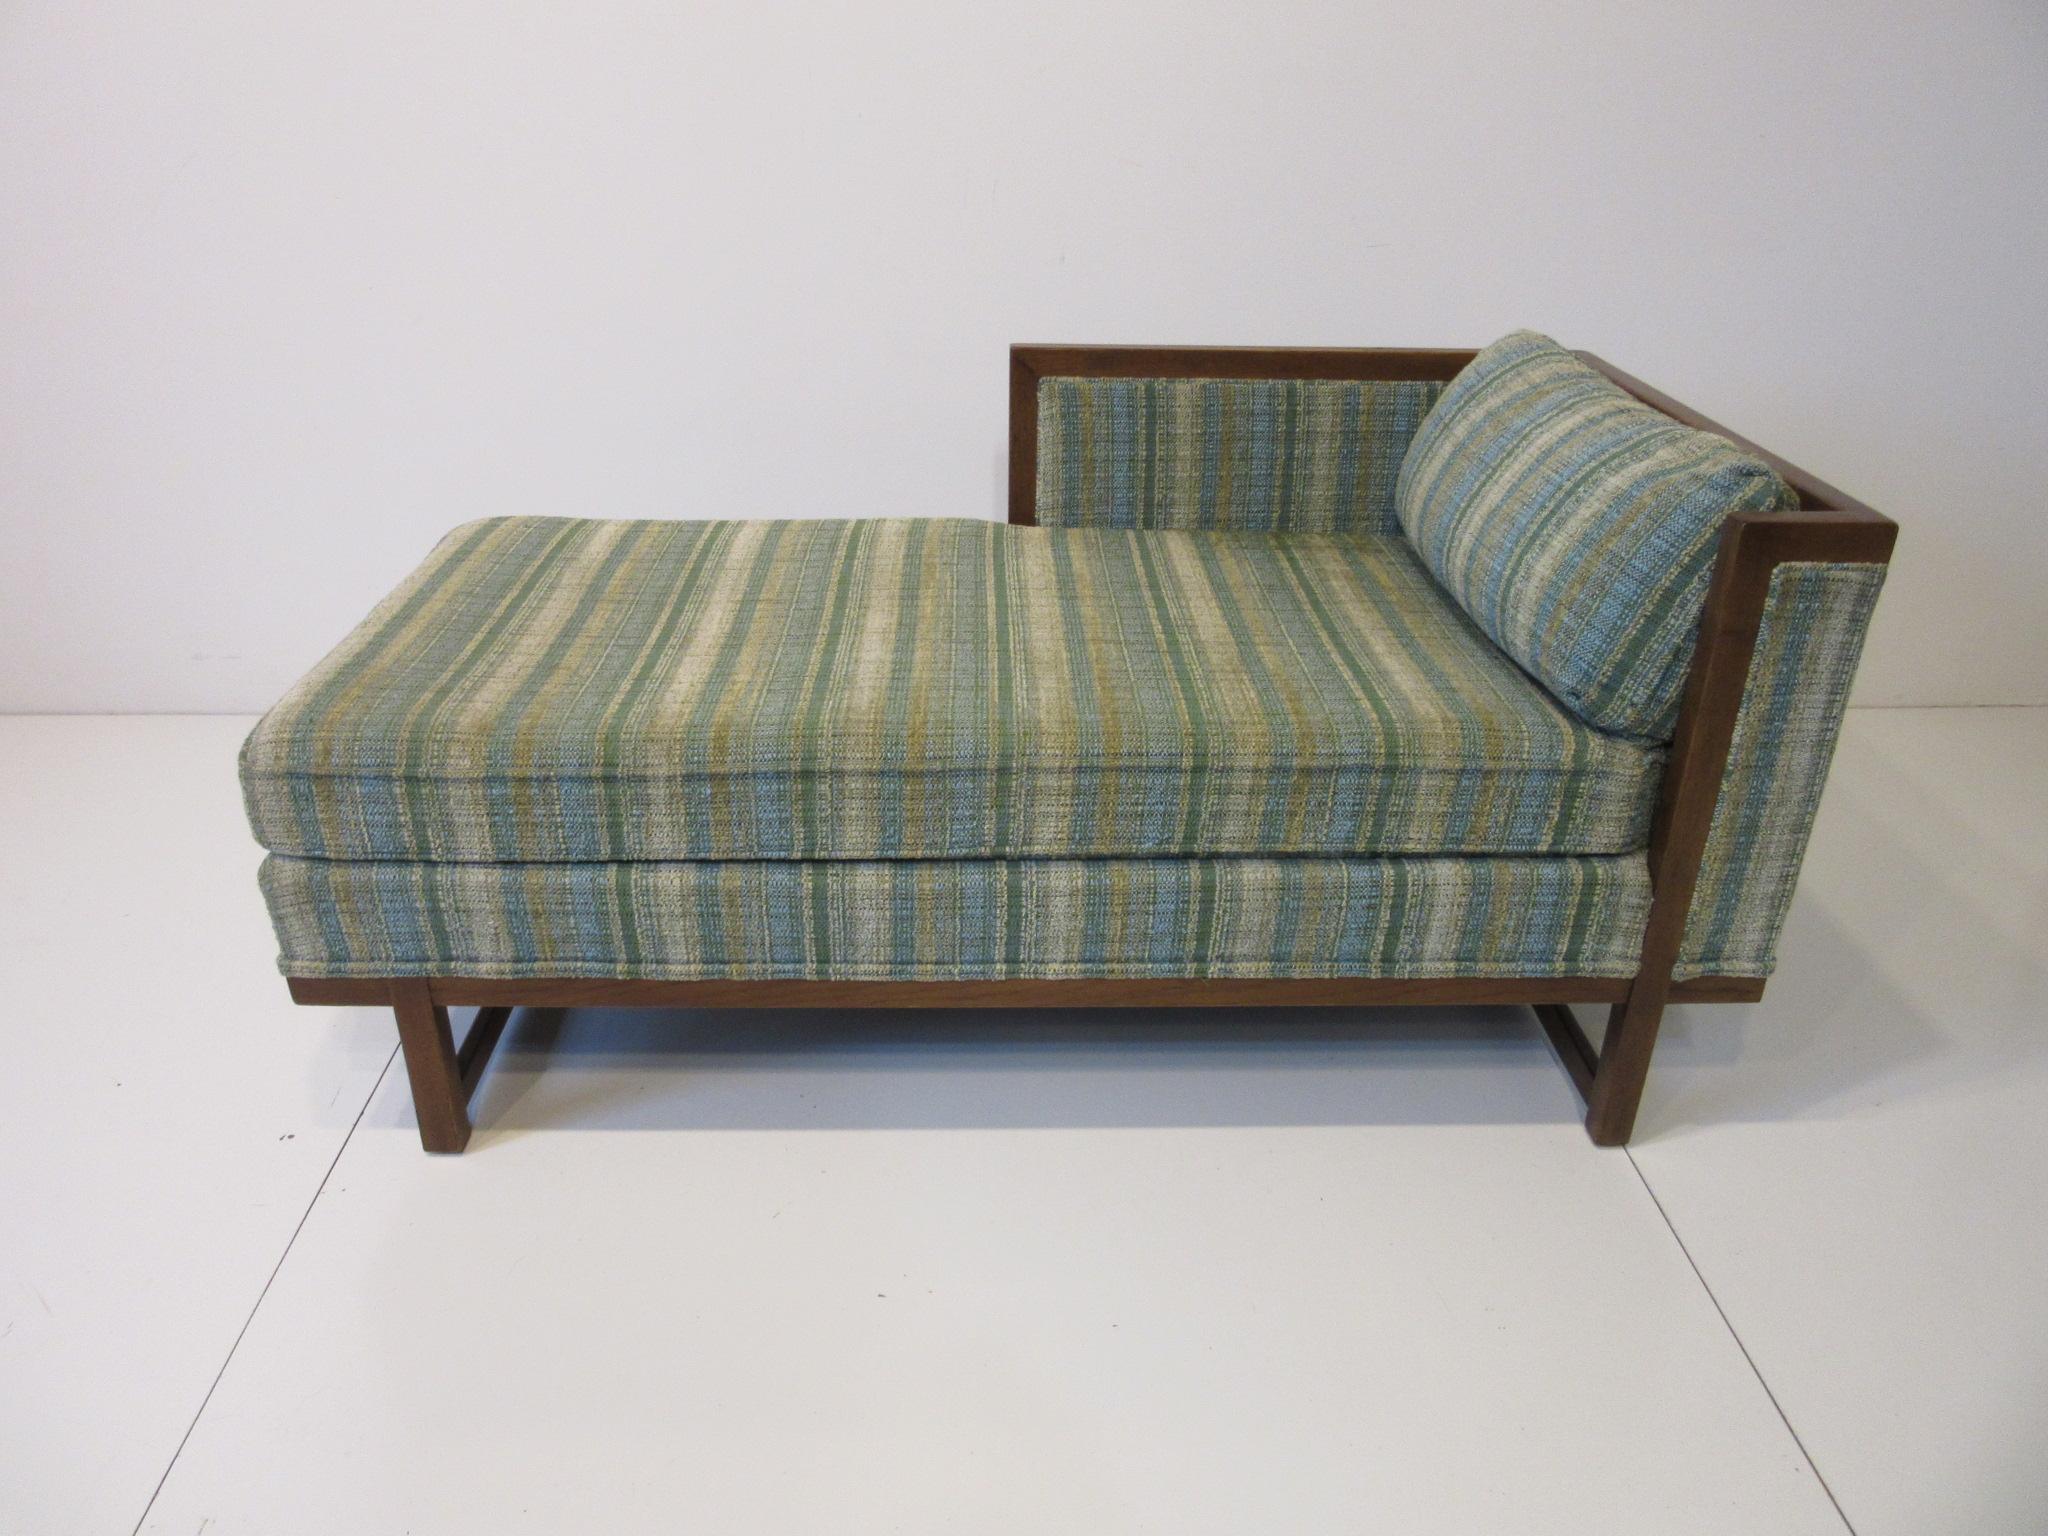 A very well crafted midcentury chaise lounge chair with green/ sea blue and taupe upholstery with matching back pillow. The medium dark wood frame with lower stretchers and upper support to the side and back making a tight and refined look.